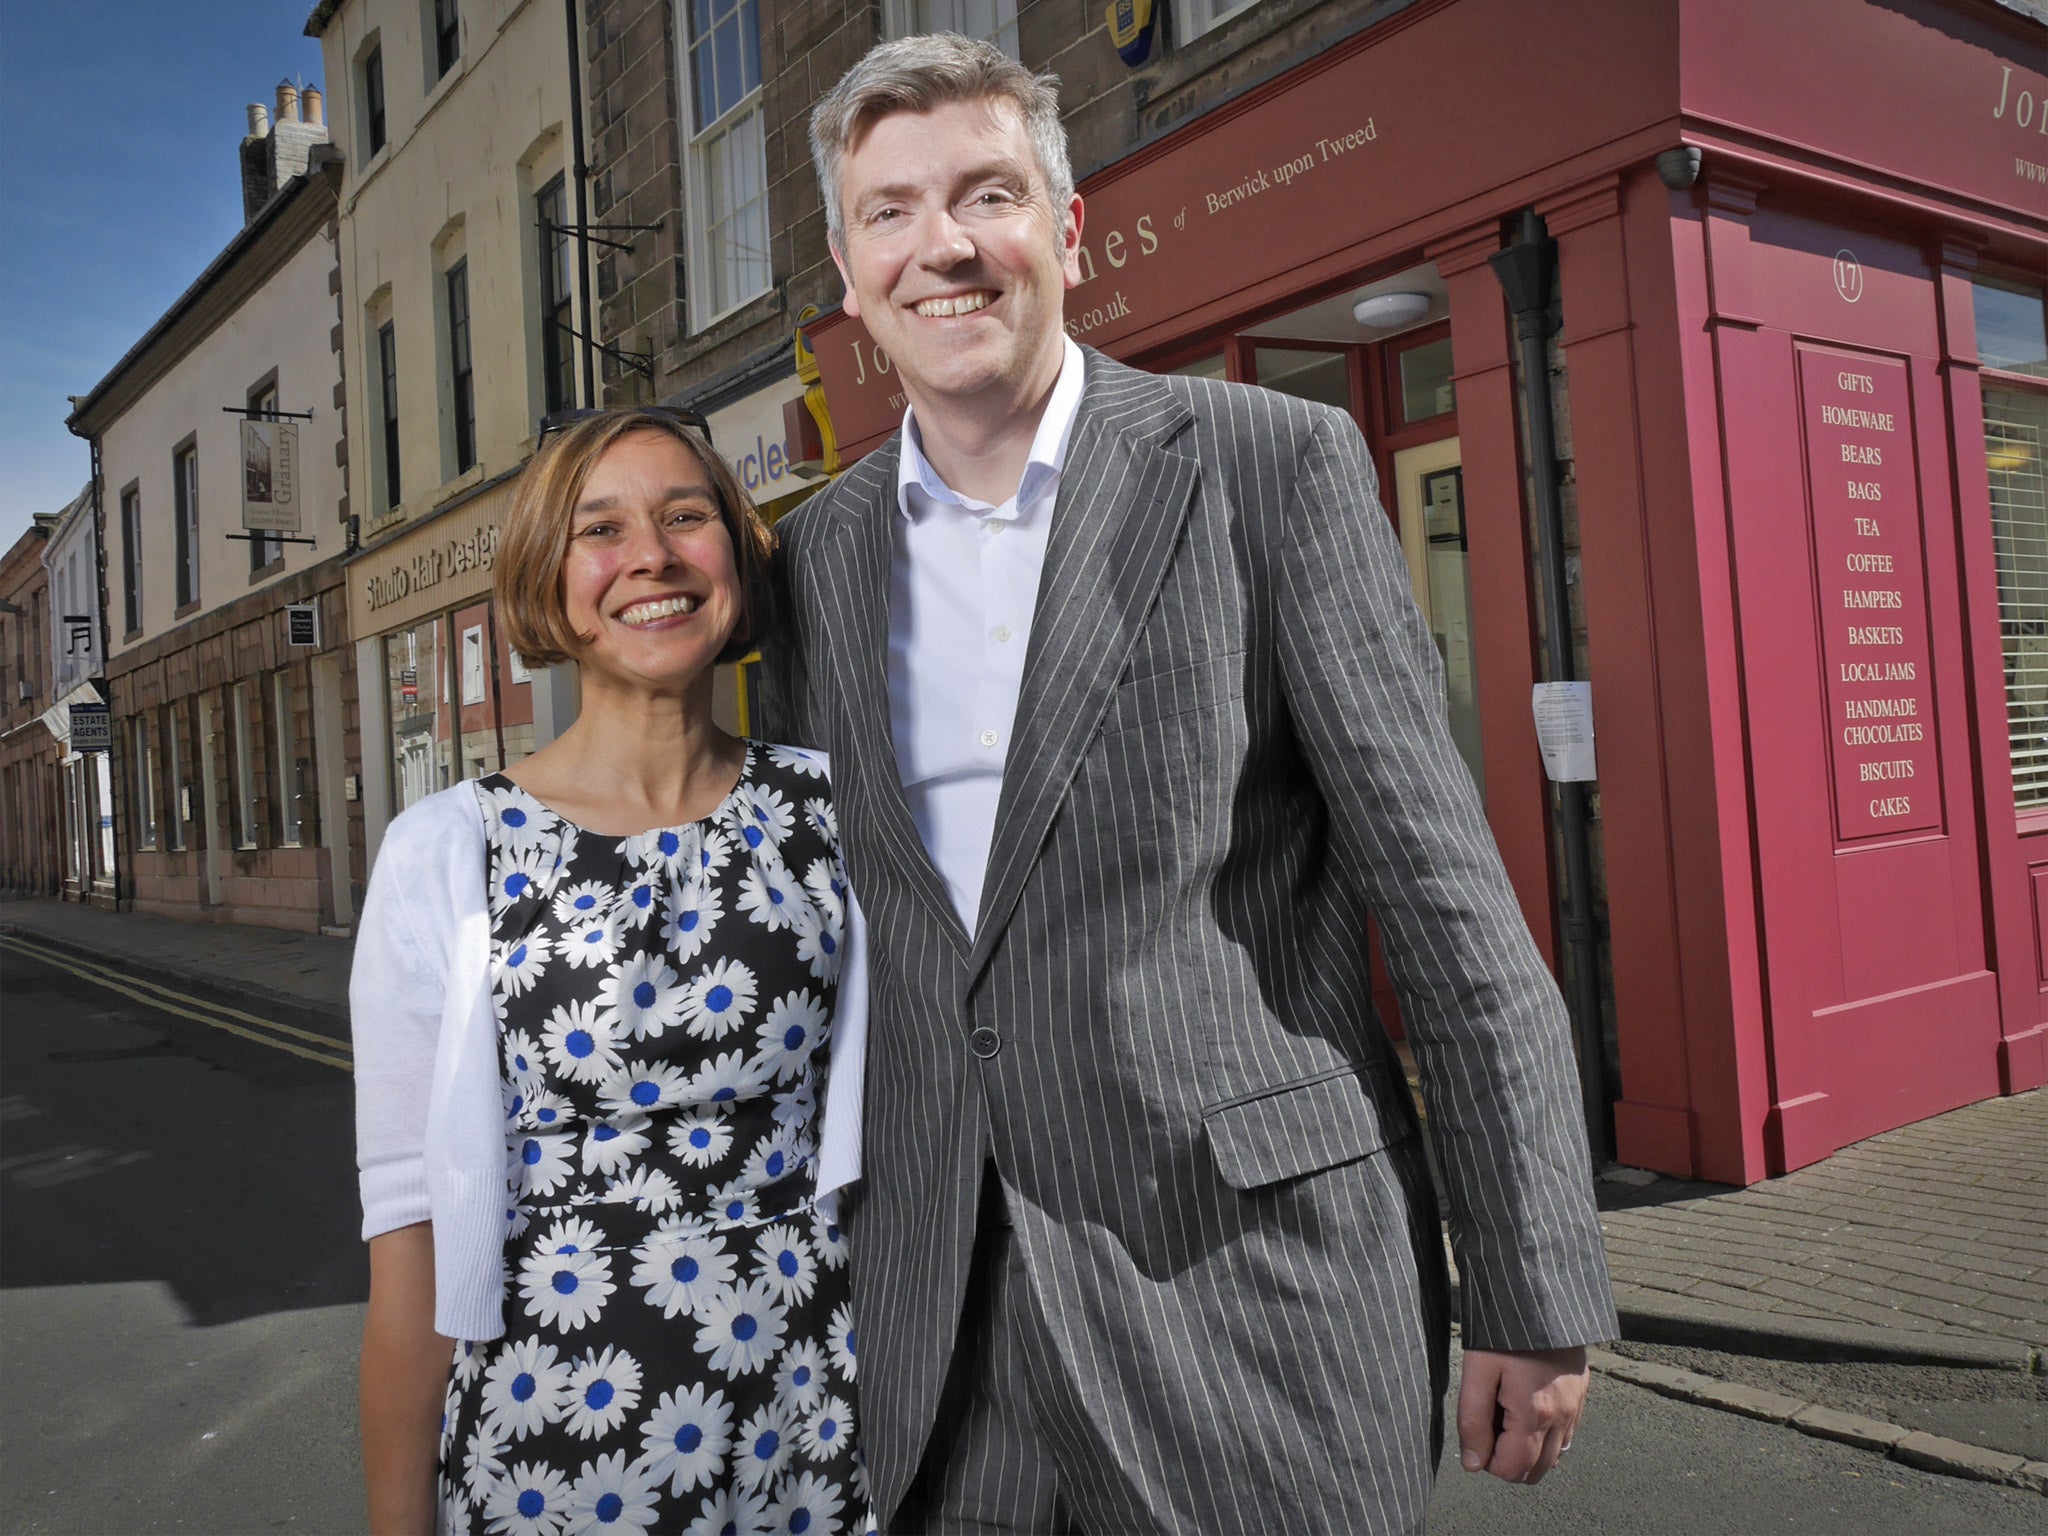 Gavin and Gail Jones, outside their shop in Berwick-upon-Tweed, fear the impact of a Yes vote